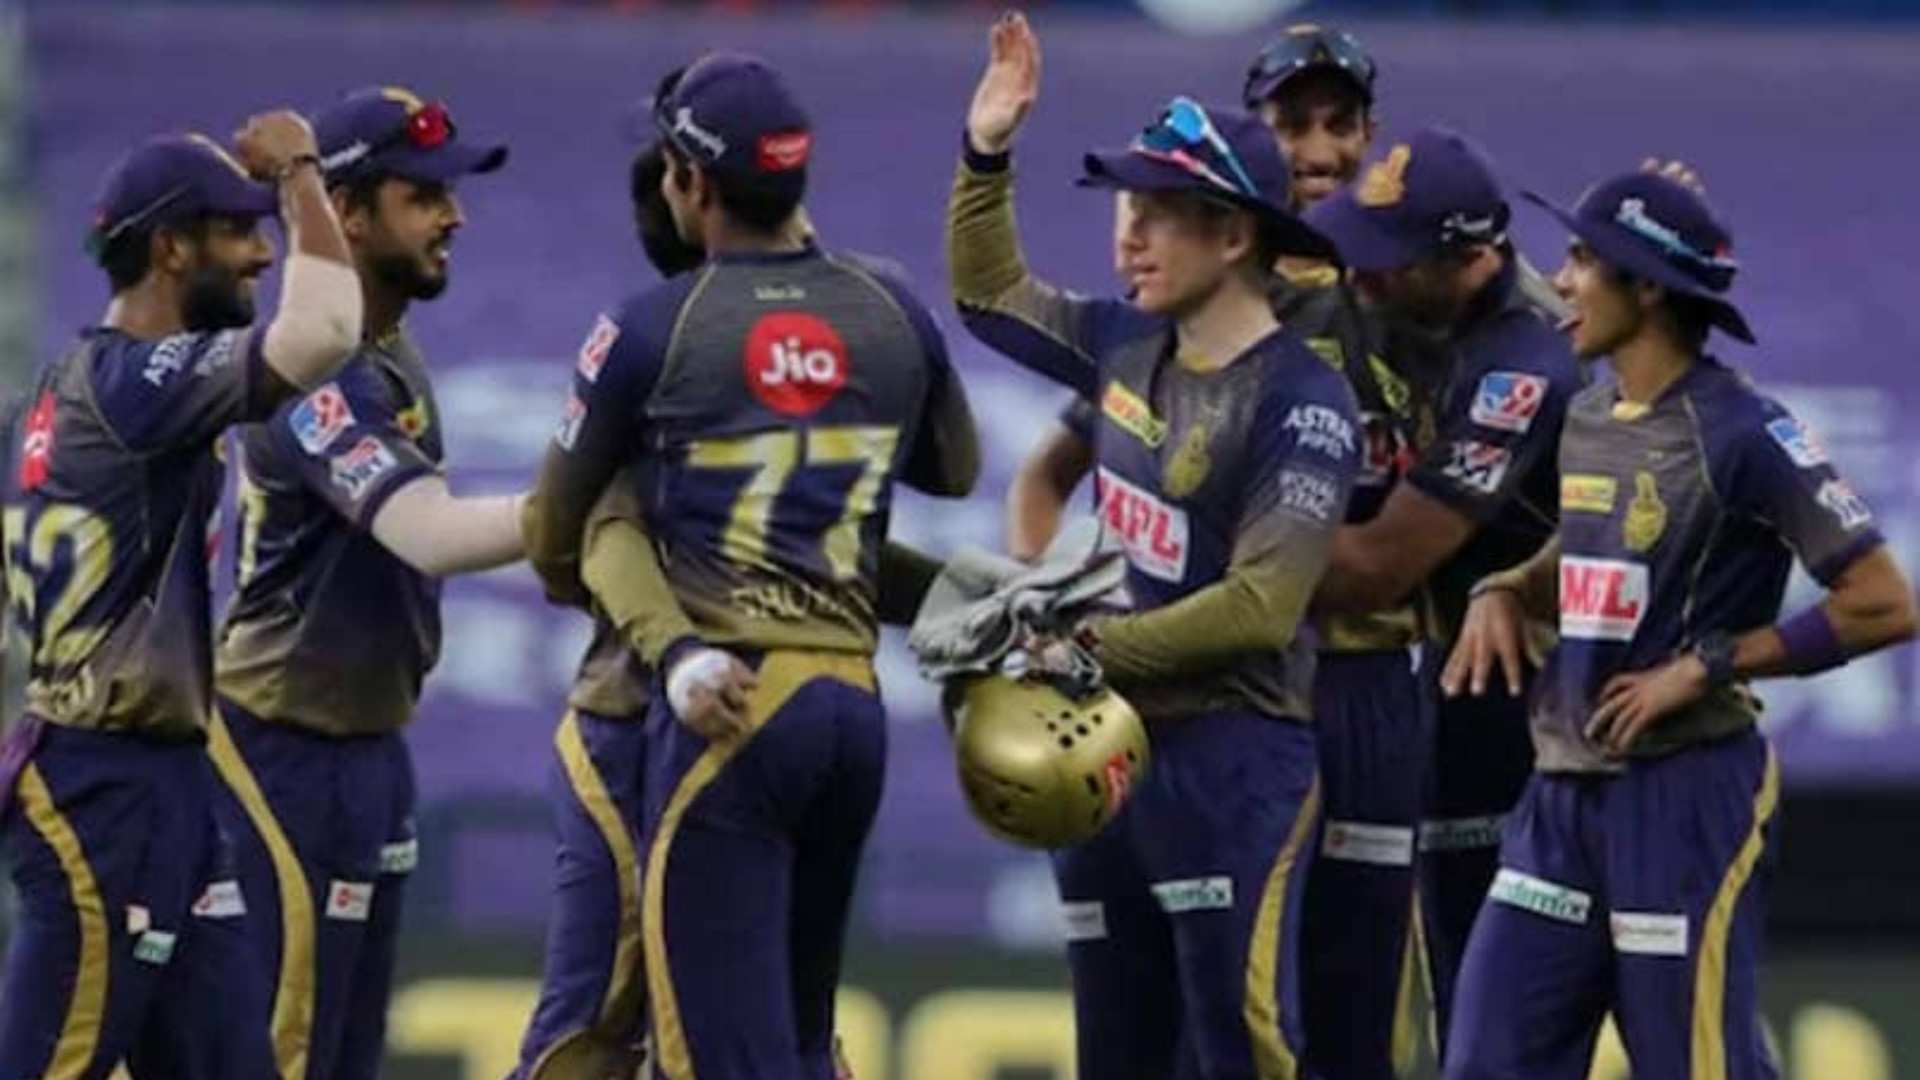 KKR players in a file photo. (Image credit: Twitter)